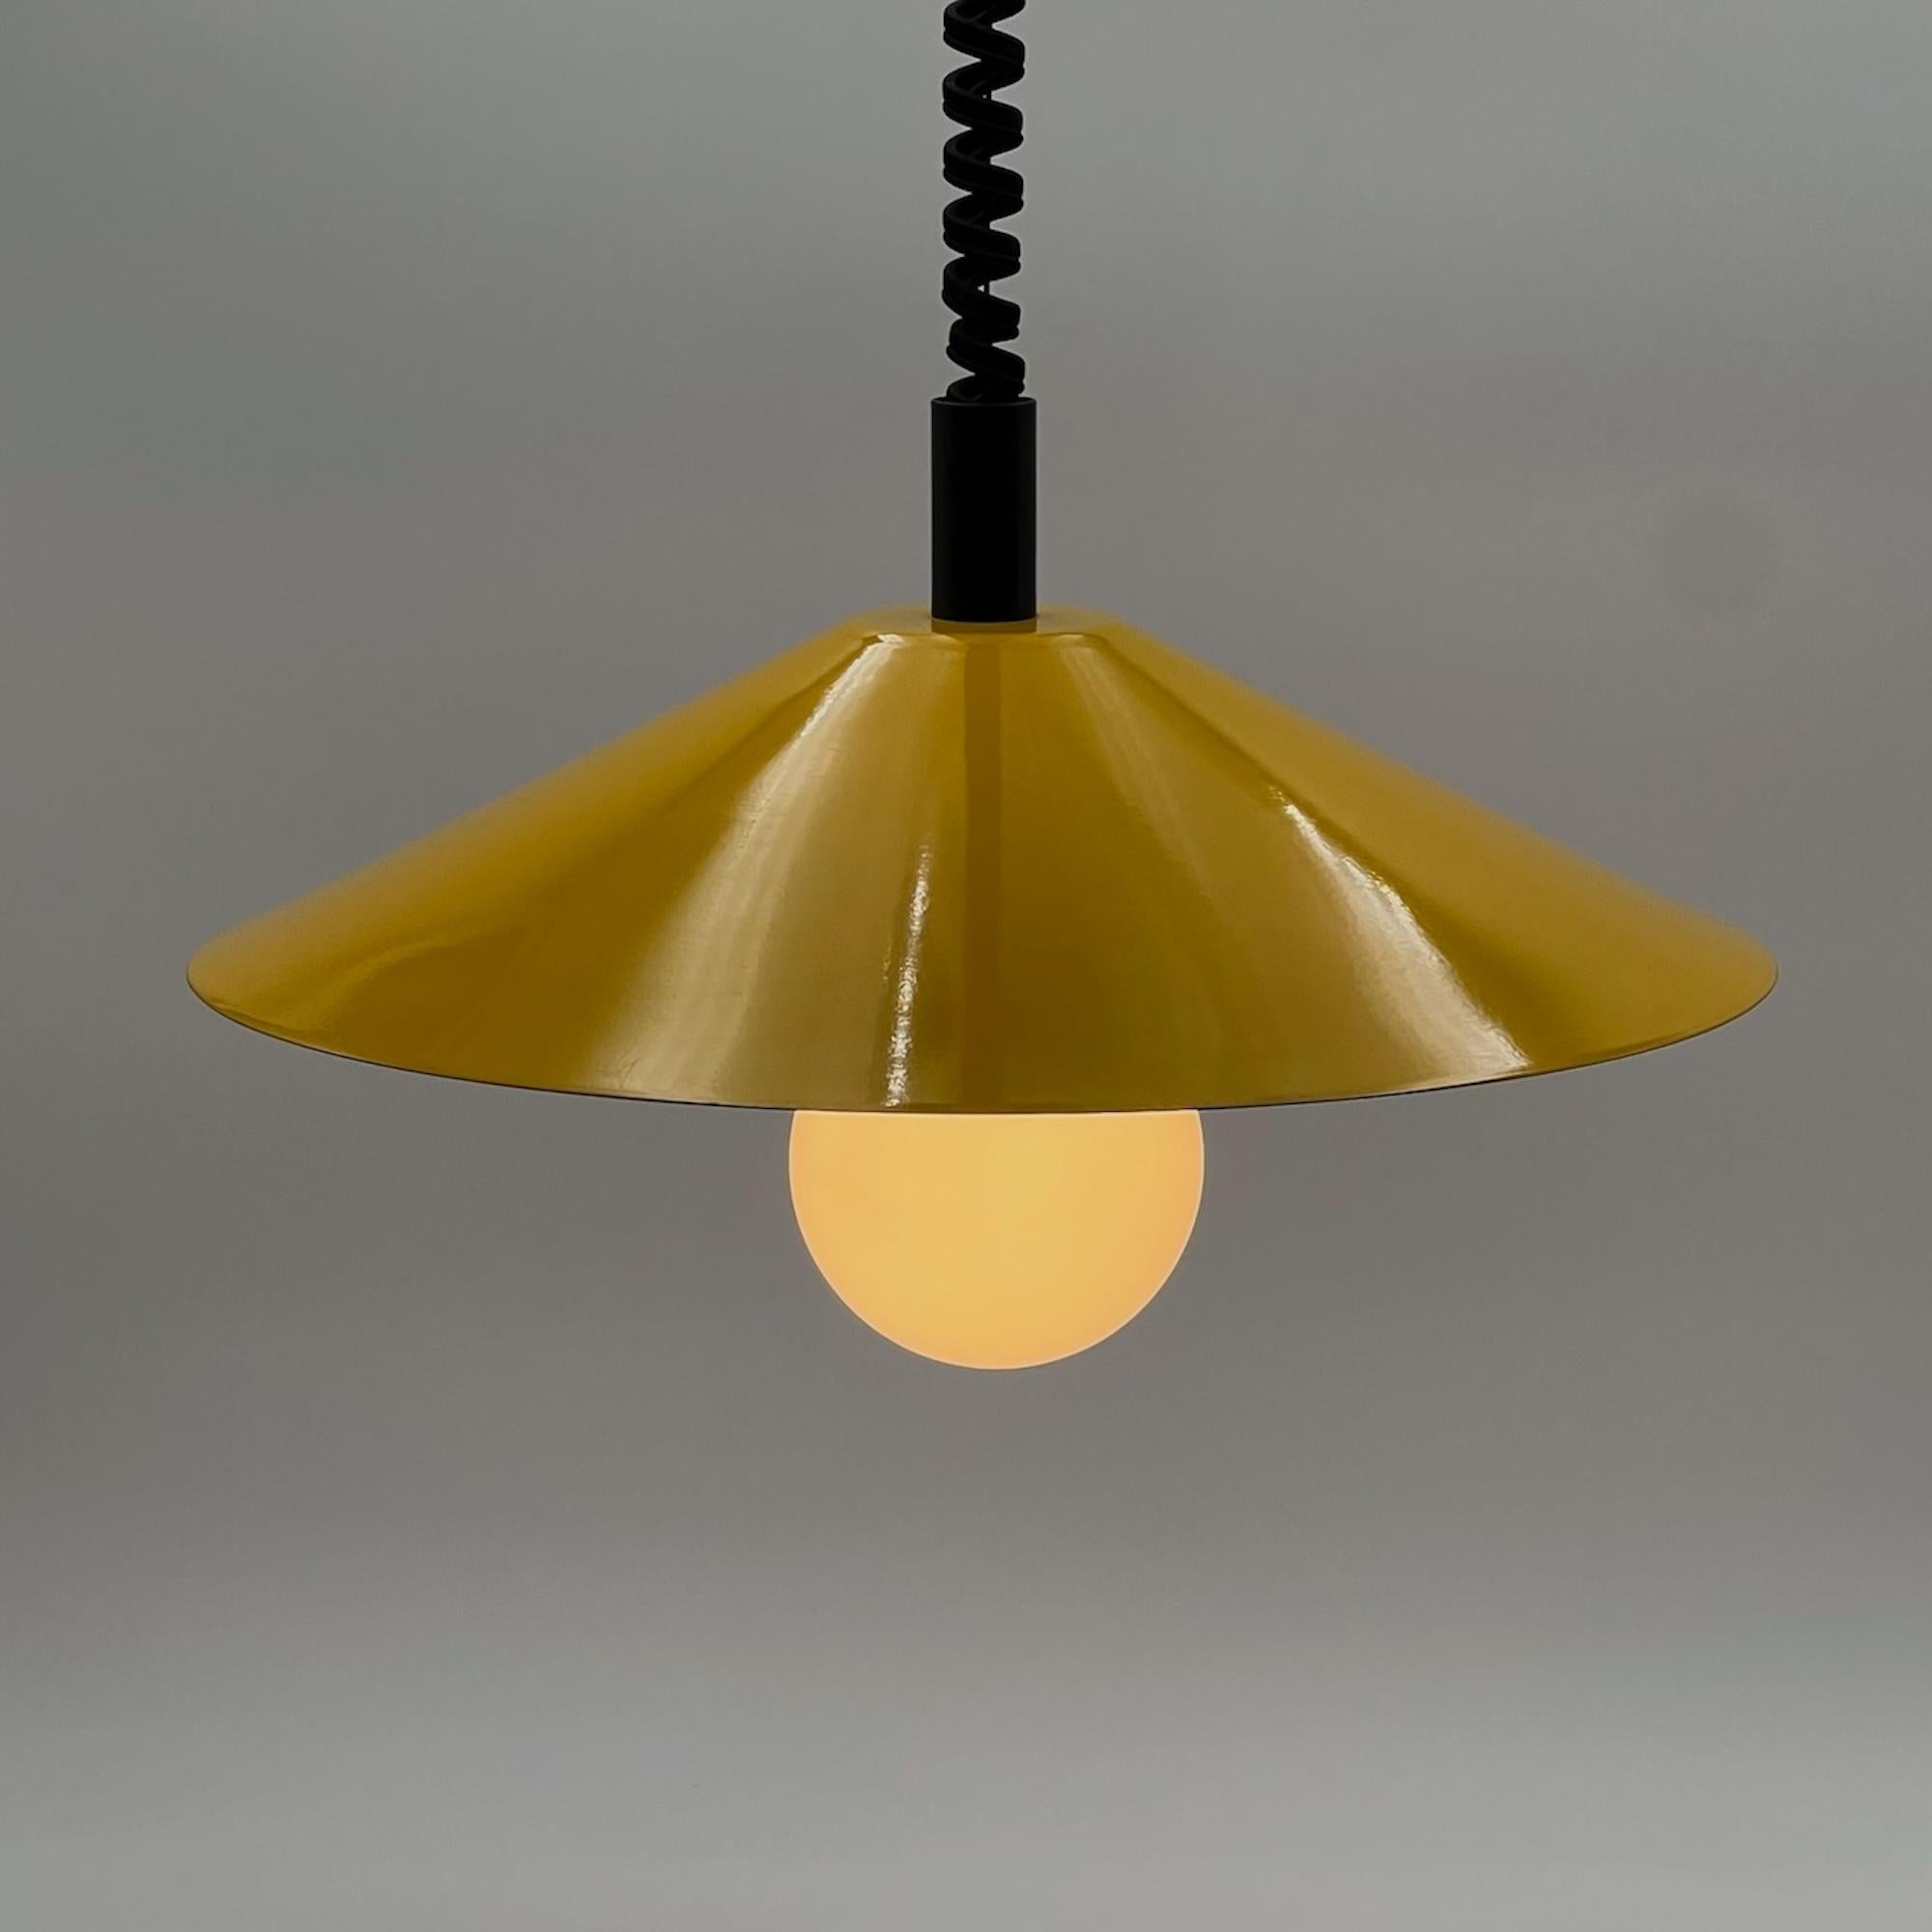 Step into the captivating world of vintage design with this space age hanging lamp, a remarkable piece crafted in Italy during the 1970s. The lamp exudes a minimalistic charm, featuring a cone-shaped lampshade made of lacquered metal that is